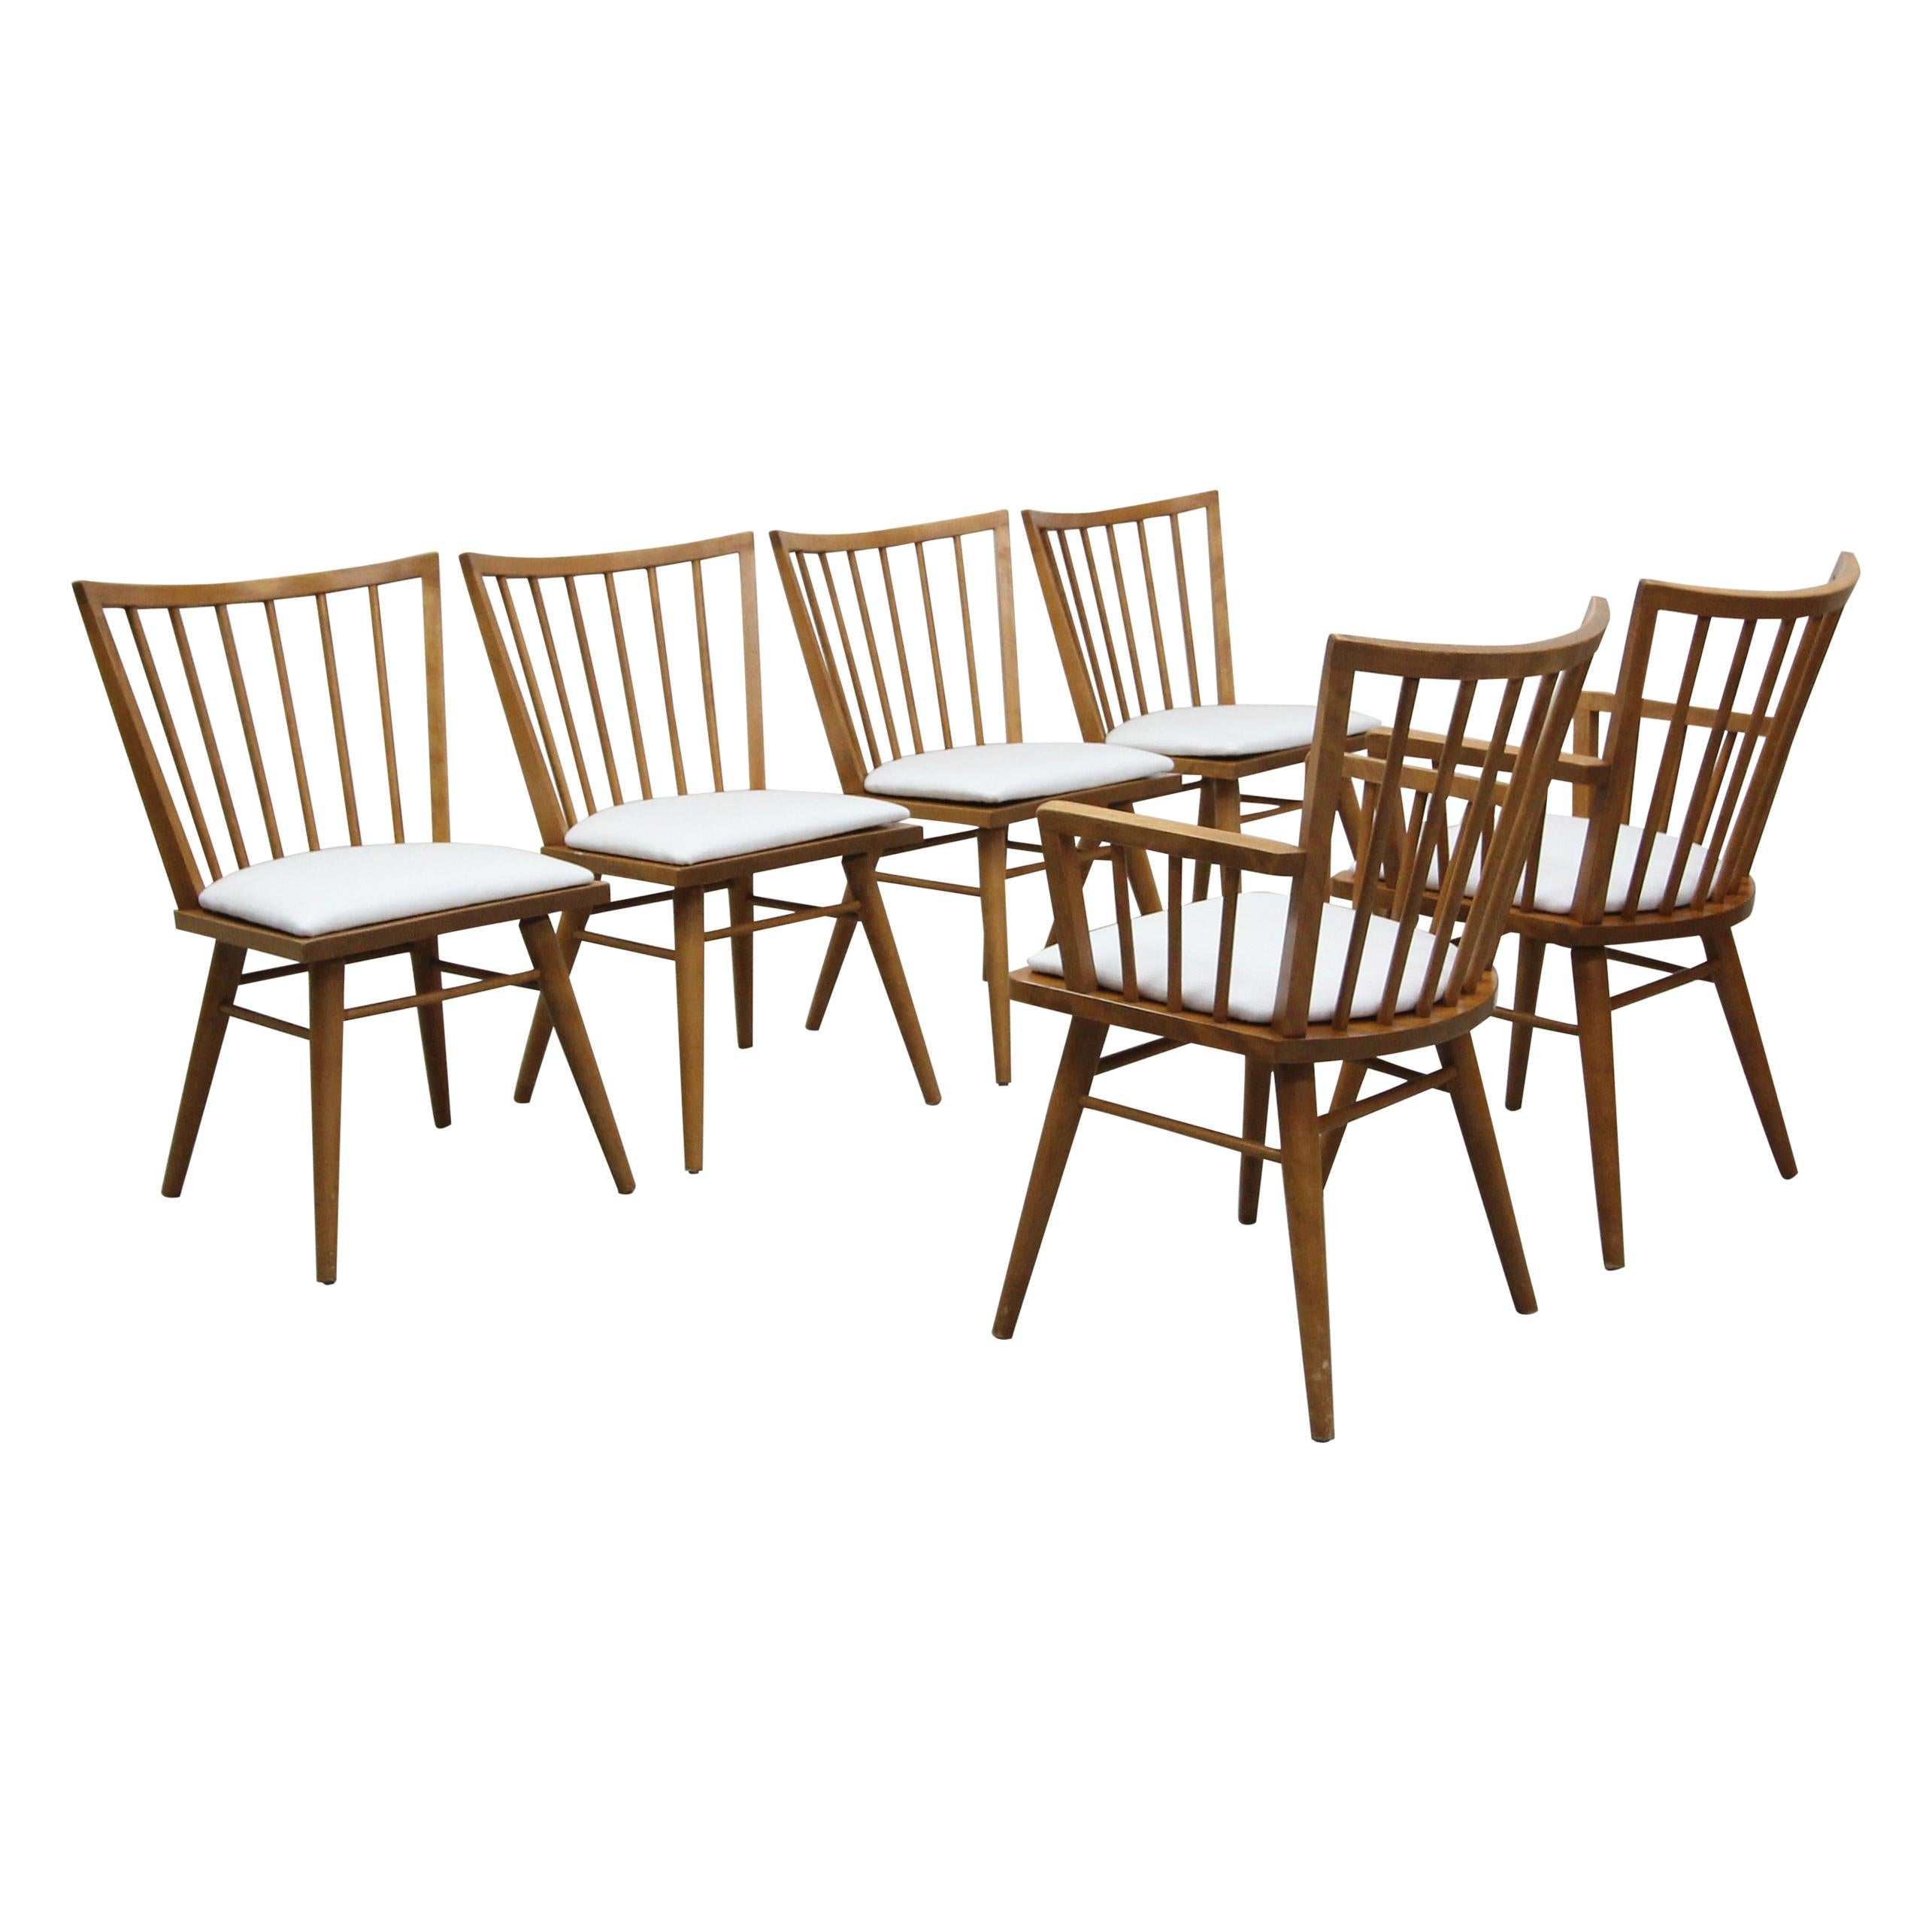 Set of Six Midcentury Maple Spindle Back Dining Chairs by Conant Ball